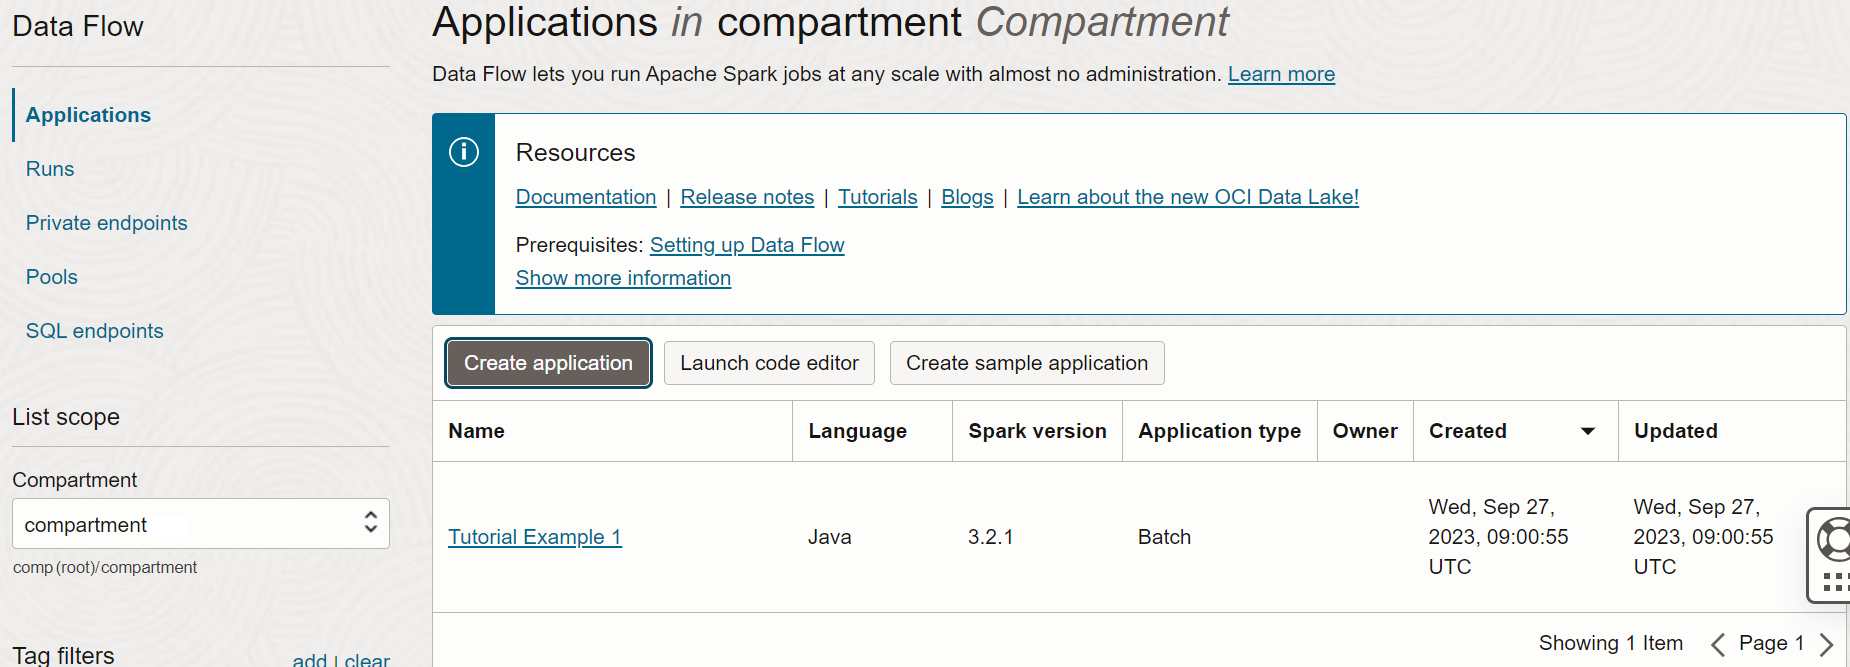 The Applications page. In the list of applications is one application. It consists of seven columns, Name, Language, Spark version, Application type, Owner, Created, and Updated. Name contains Tutorial Example 1. Language is set to Java. Spark version is set to 3.2.1. Application type is set to Batch. The other fields are populated according to who created the application, when it was created and when it was last updated (which in this case is the same date and time as Created).